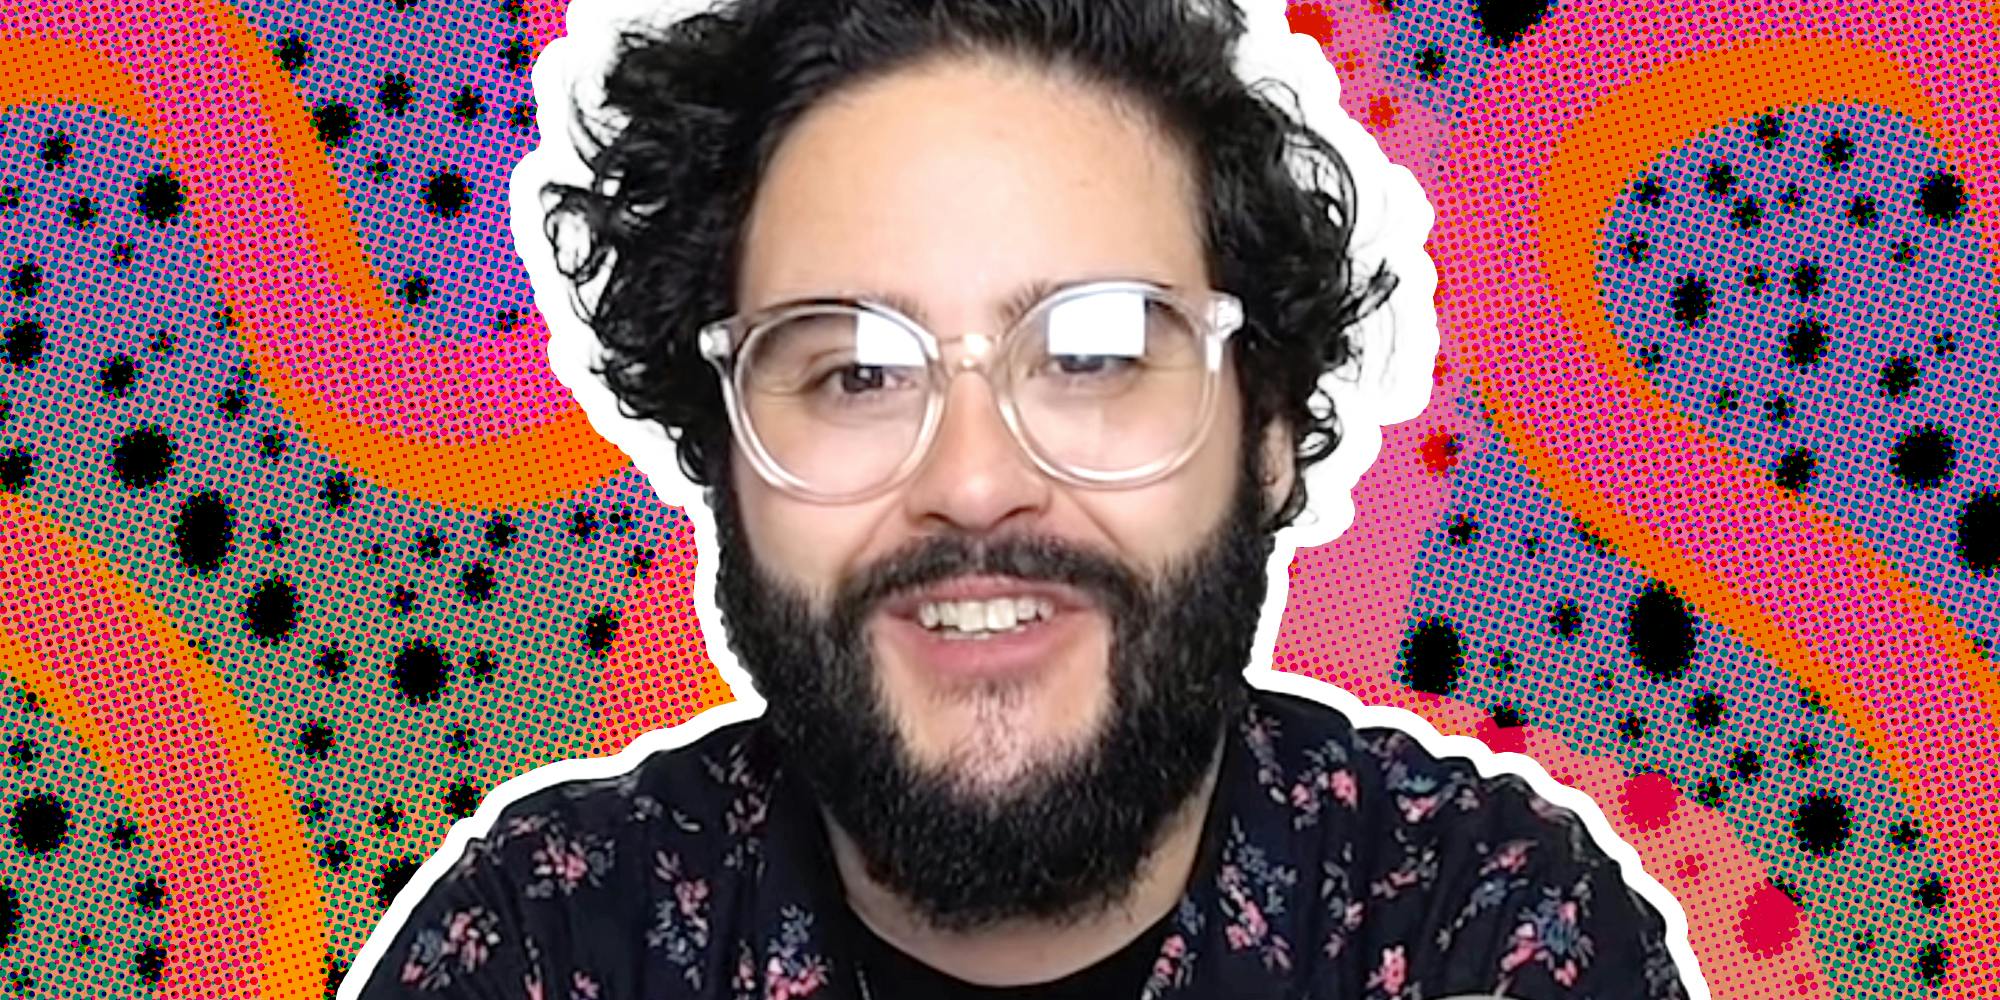 Creator Confessional: Veteran Internet Personality Steve Zaragoza on Why He’s ‘Afraid of Content’